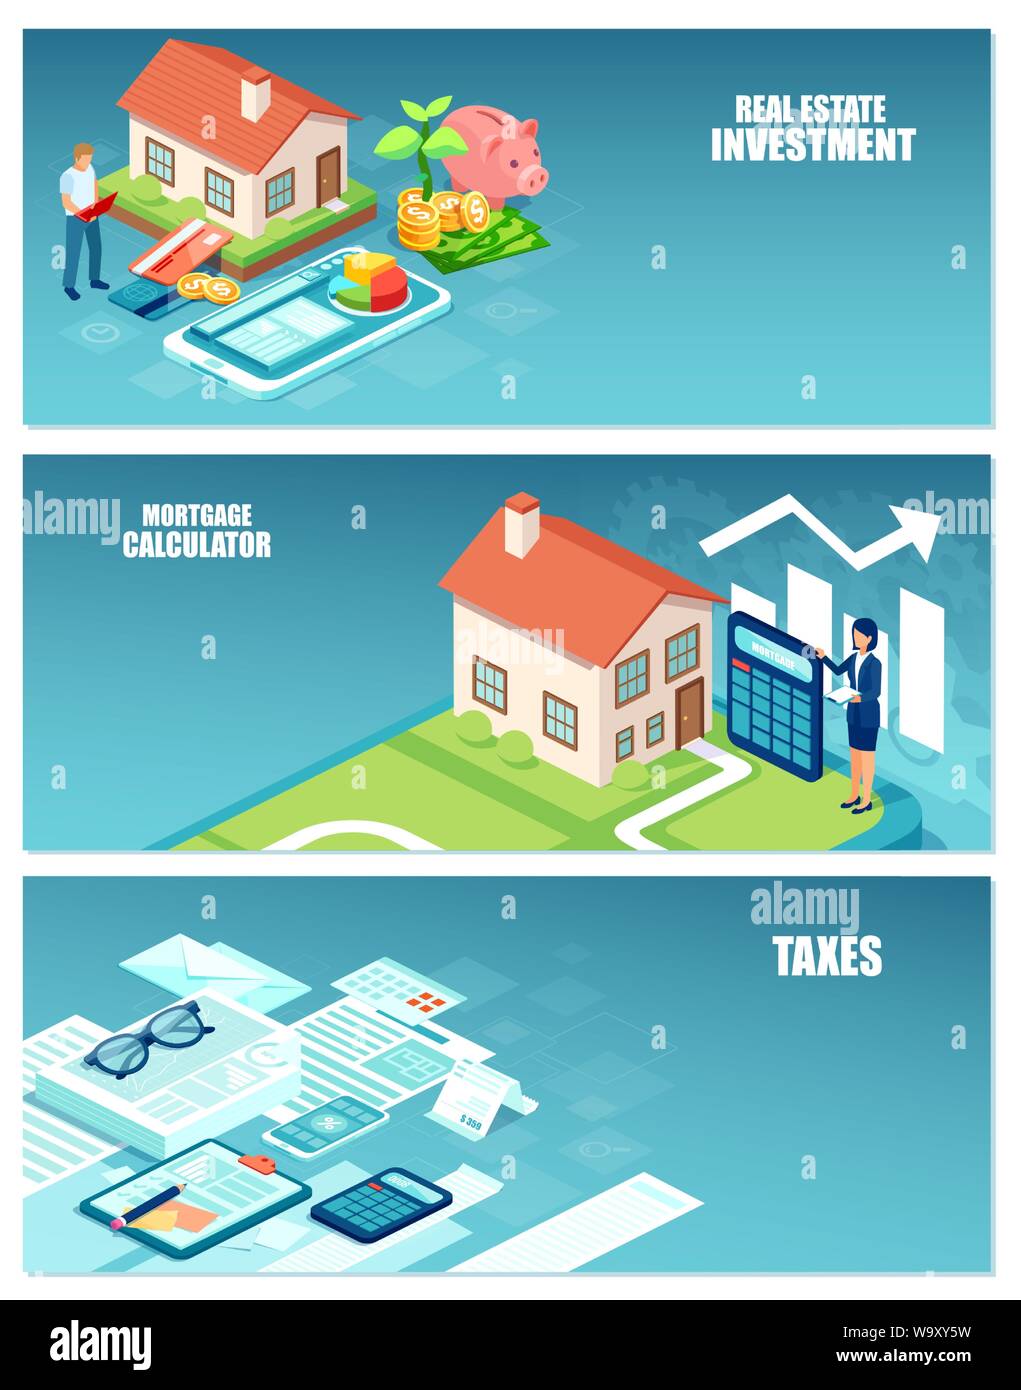 Real estate investment, home buyer costs and taxes calculations banner set concept Stock Vector